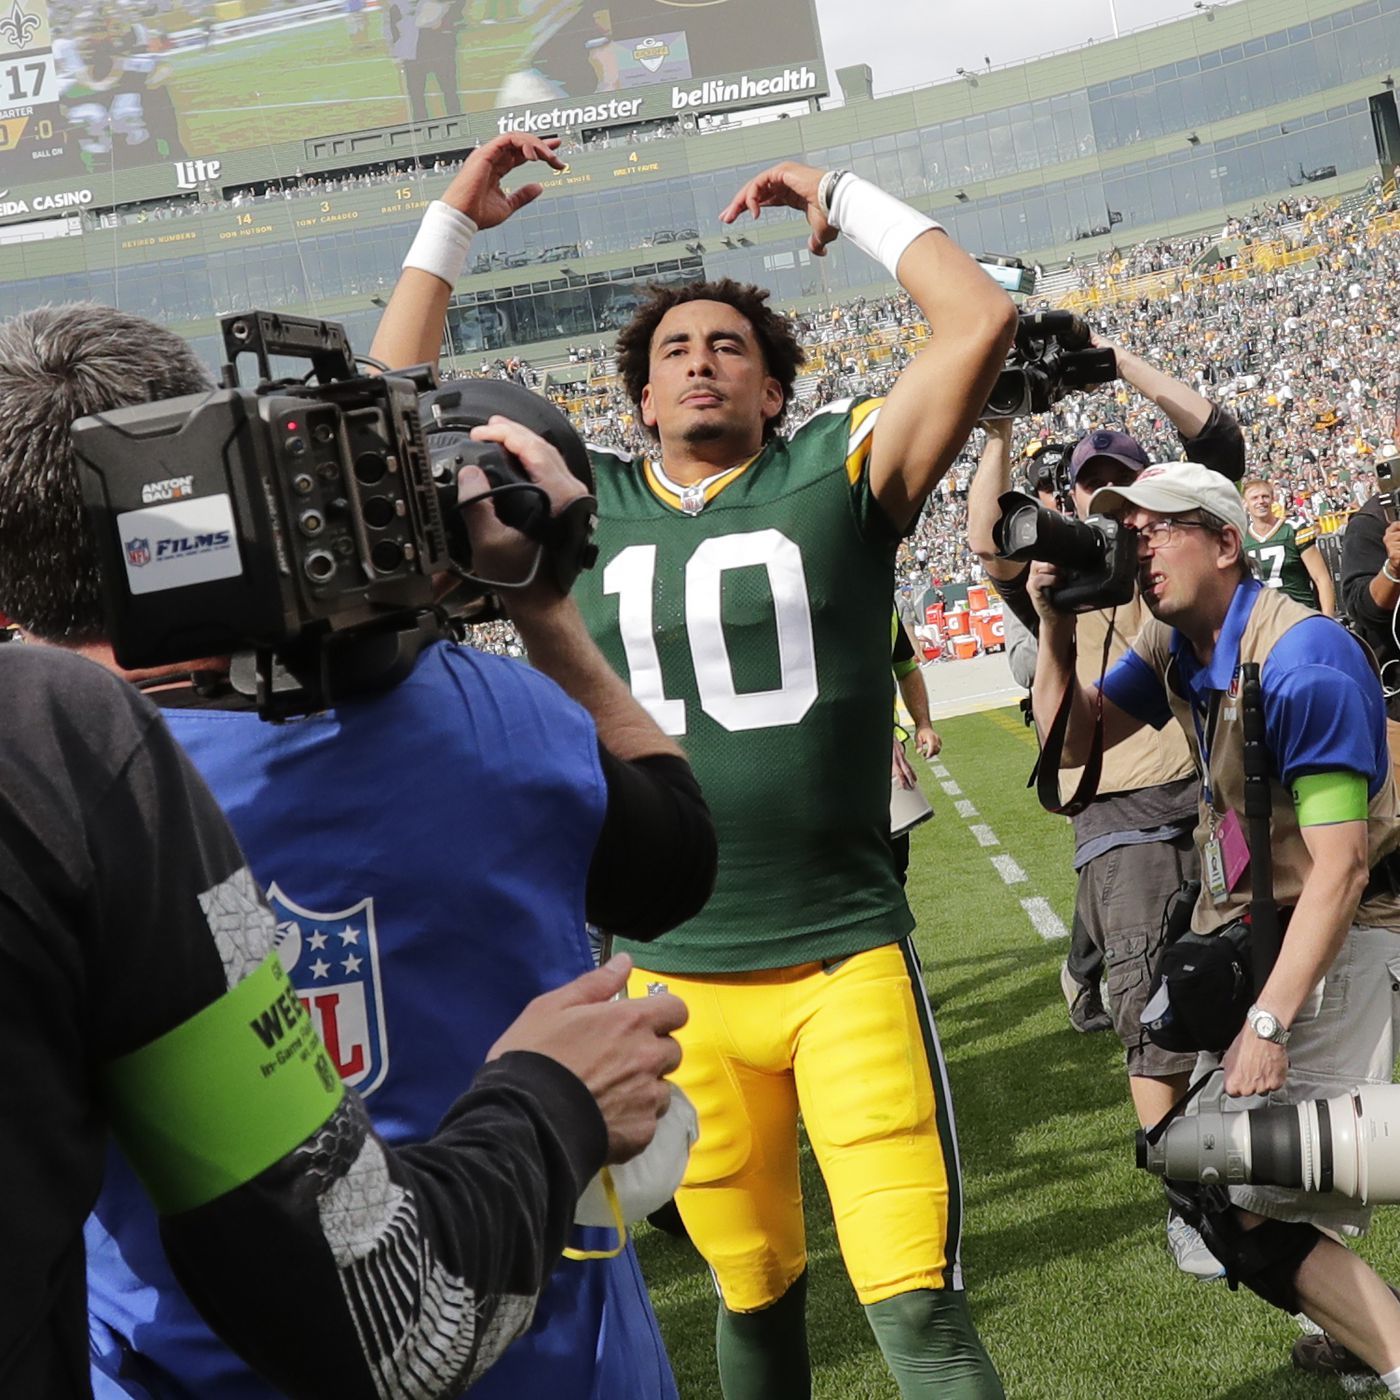 Key to the game: Packers' epic comeback started with complementary football